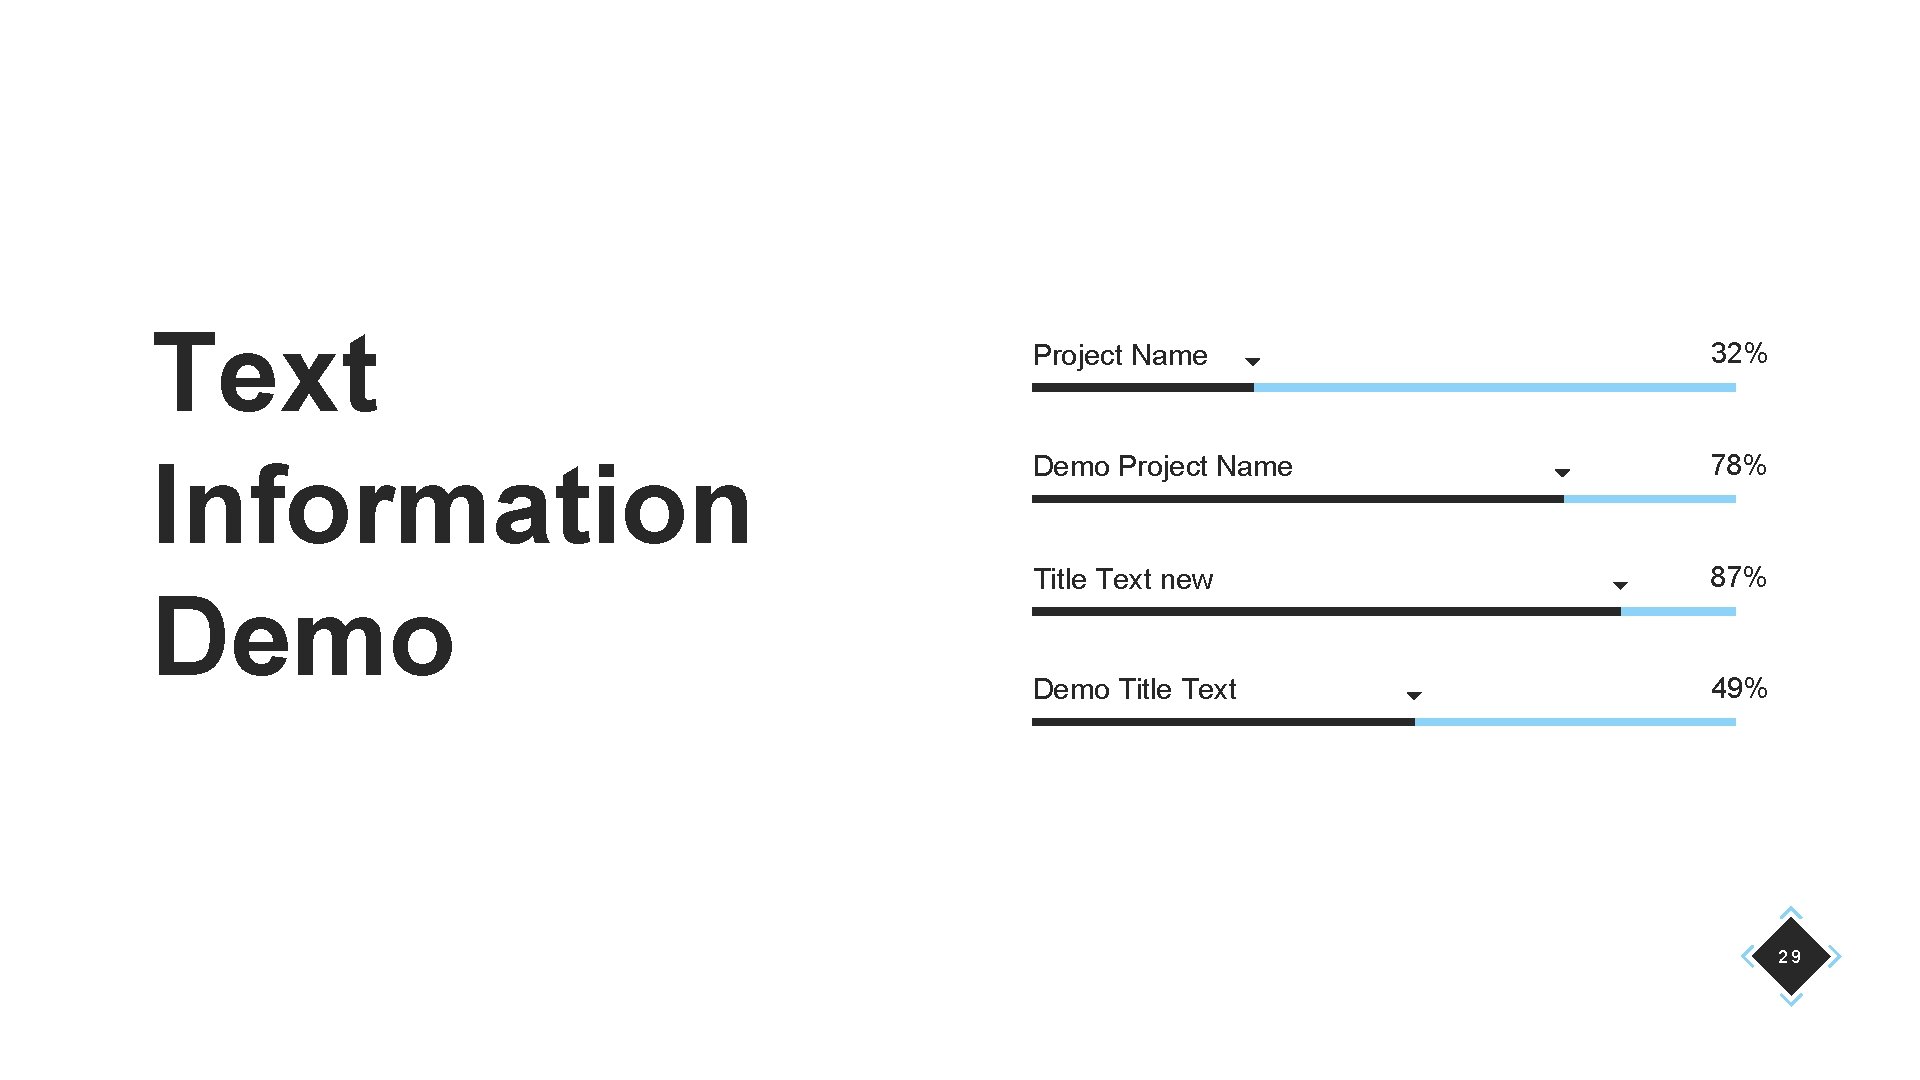 Text Information Demo Project Name 32% Demo Project Name 78% Title Text new 87%